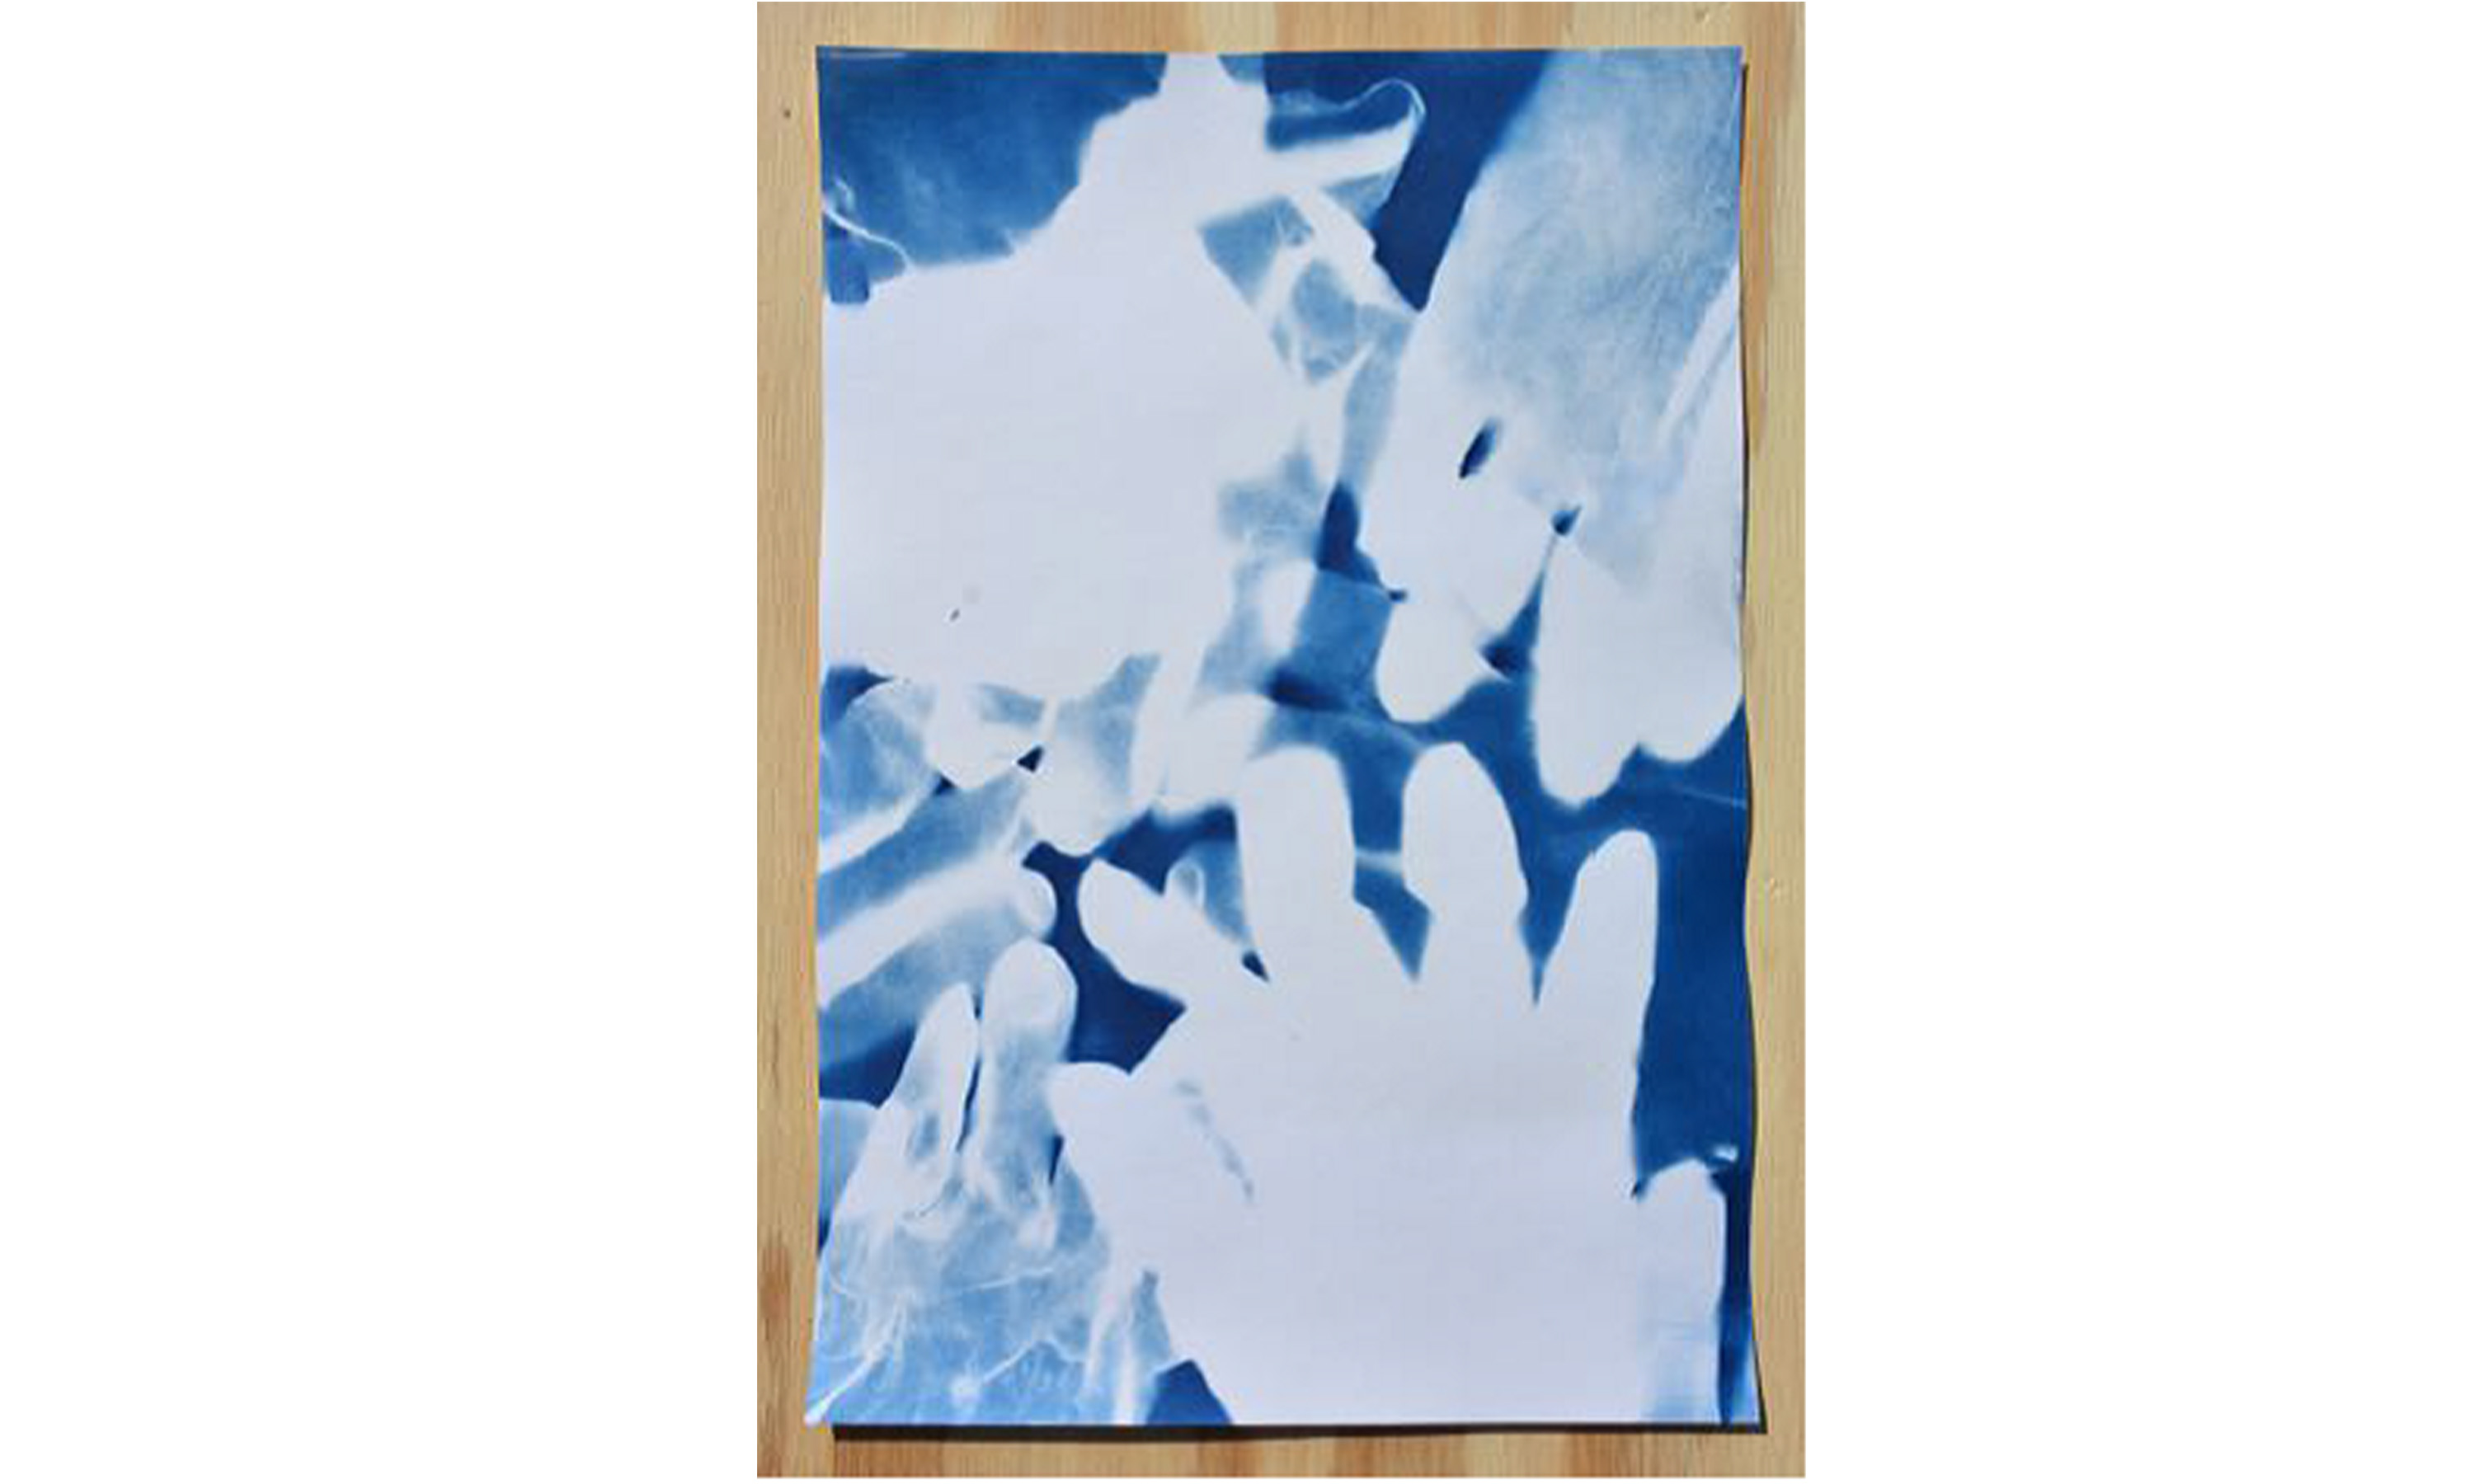 Cyanotype of different colored gloves